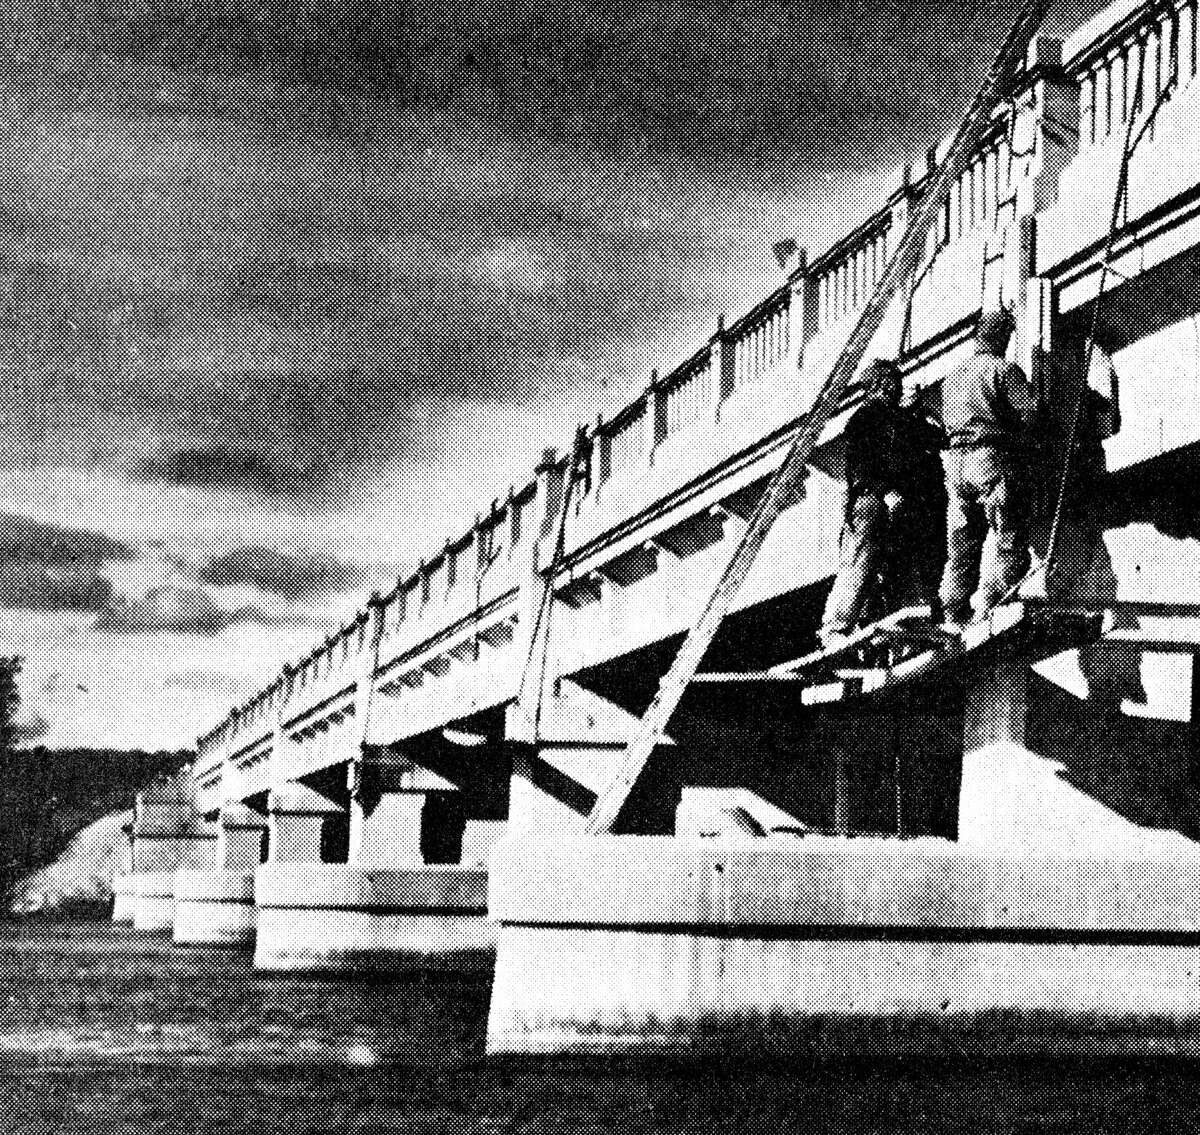 State highway department employees repair the support columns of the M-55 Bridge which crosses the Big Manistee River. The concrete facings on some of the columns have broken up, requiring repair work. The job is expected to be completed by the end of the month. The photo was published in the News Advocate on Oct. 26, 1962.